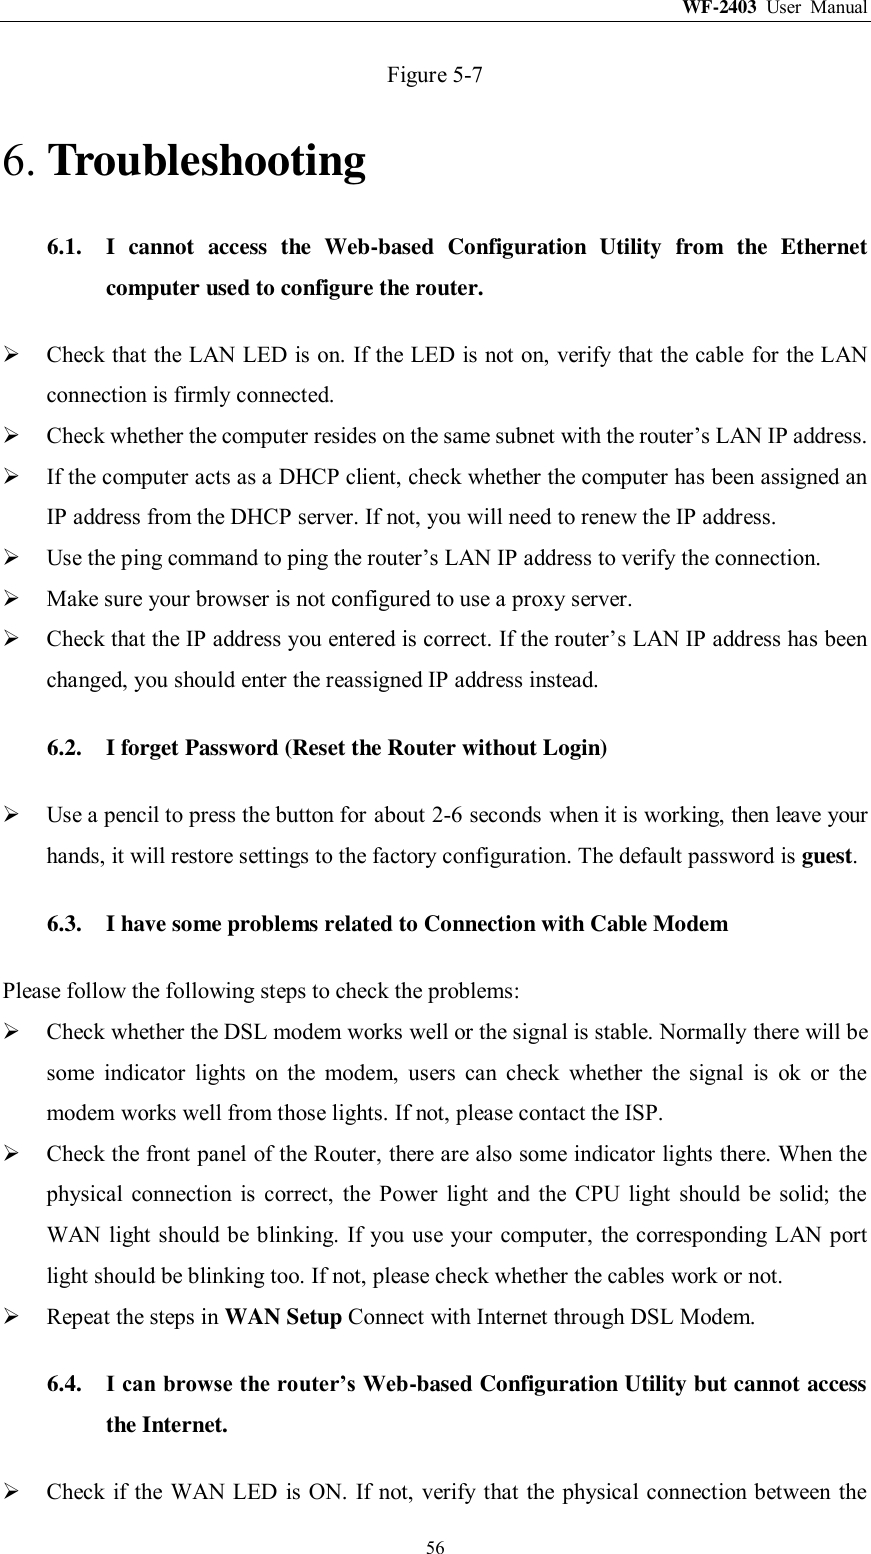 WF-2403  User  Manual  56 Figure 5-7 6. Troubleshooting 6.1. I  cannot  access  the  Web-based  Configuration  Utility  from  the  Ethernet computer used to configure the router.  Check that the LAN LED is on. If the LED is not on, verify that the cable for the LAN connection is firmly connected.  Check whether the computer resides on the same subnet with the router‟s LAN IP address.  If the computer acts as a DHCP client, check whether the computer has been assigned an IP address from the DHCP server. If not, you will need to renew the IP address.    Use the ping command to ping the router‟s LAN IP address to verify the connection.  Make sure your browser is not configured to use a proxy server.  Check that the IP address you entered is correct. If the router‟s LAN IP address has been changed, you should enter the reassigned IP address instead. 6.2. I forget Password (Reset the Router without Login)  Use a pencil to press the button for about 2-6 seconds when it is working, then leave your hands, it will restore settings to the factory configuration. The default password is guest. 6.3. I have some problems related to Connection with Cable Modem Please follow the following steps to check the problems:  Check whether the DSL modem works well or the signal is stable. Normally there will be some  indicator  lights  on  the  modem,  users  can  check  whether  the  signal  is  ok  or  the modem works well from those lights. If not, please contact the ISP.  Check the front panel of the Router, there are also some indicator lights there. When the physical  connection  is  correct,  the  Power  light  and  the  CPU  light  should  be  solid;  the WAN light should be blinking. If you use your computer, the  corresponding LAN port light should be blinking too. If not, please check whether the cables work or not.    Repeat the steps in WAN Setup Connect with Internet through DSL Modem. 6.4. I can browse the router’s Web-based Configuration Utility but cannot access the Internet.  Check if the WAN LED is ON. If not, verify that the physical connection between the 